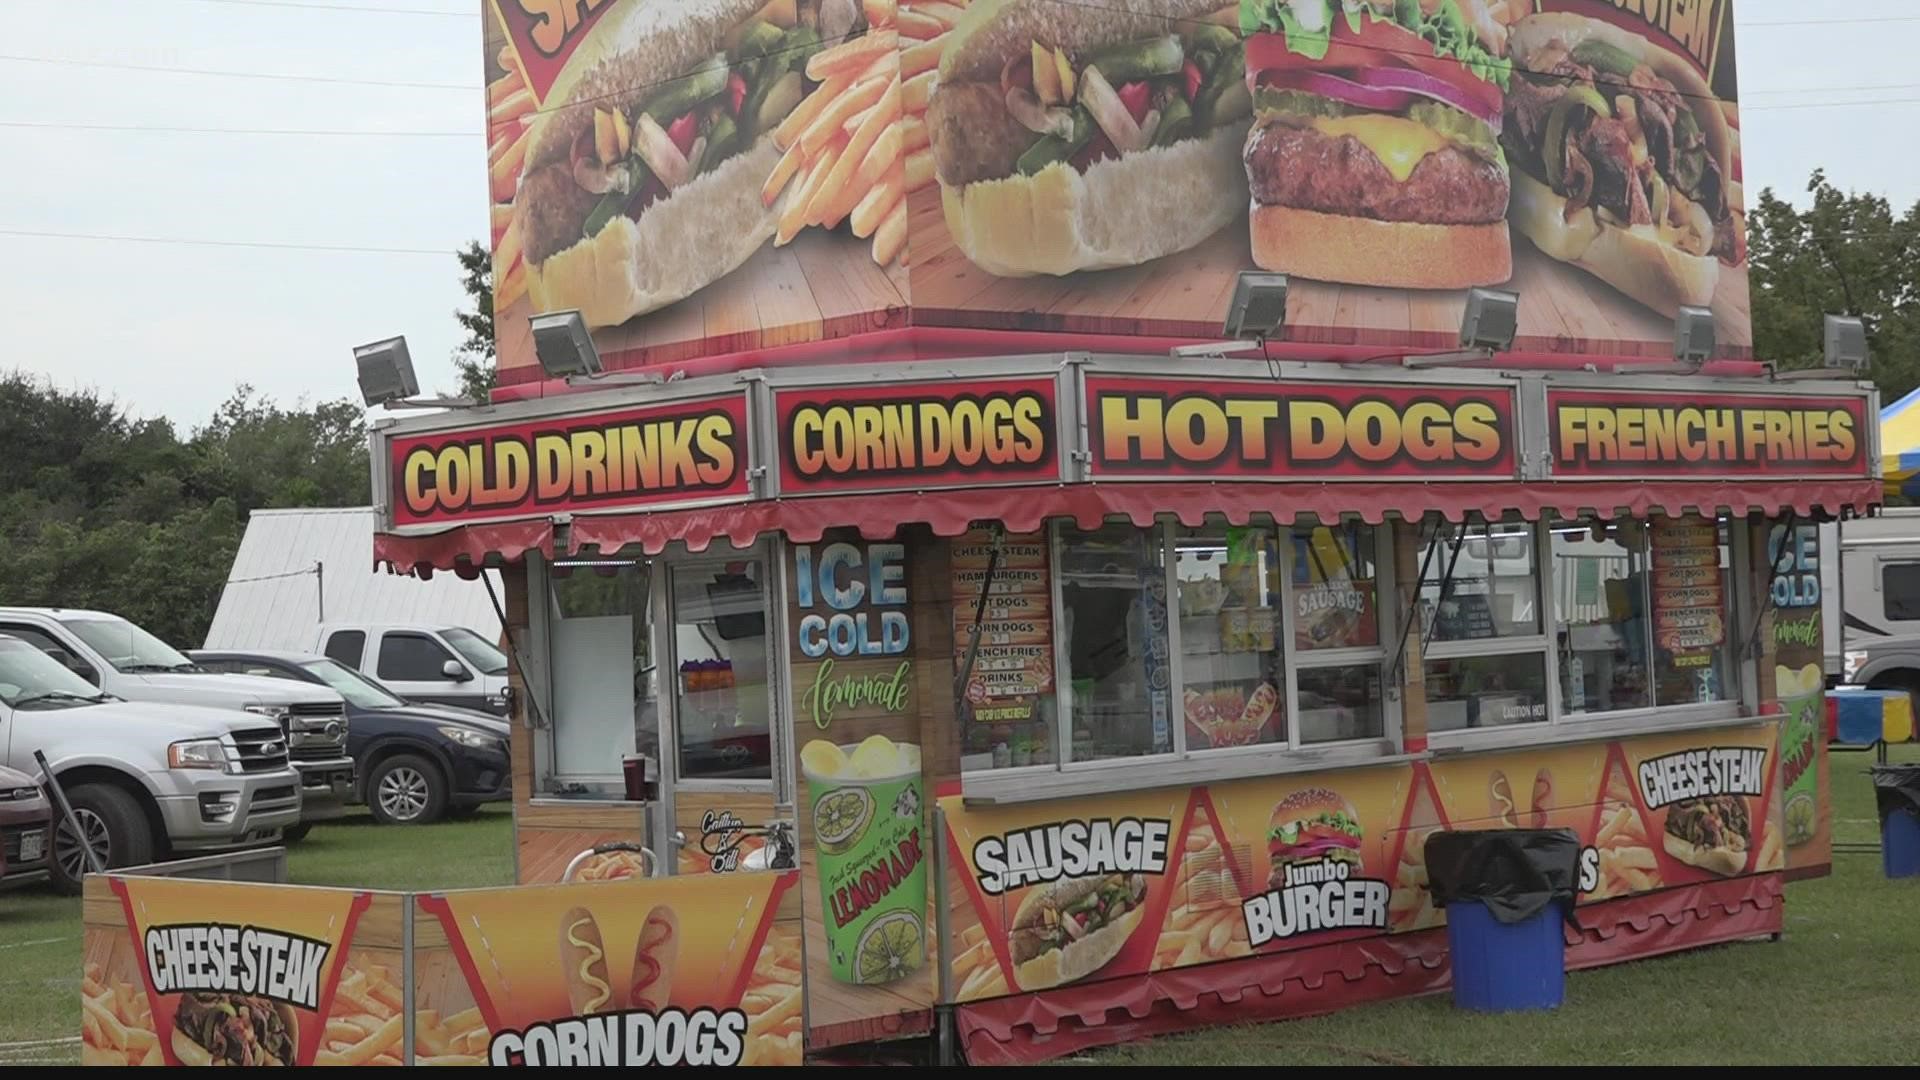 In the past, a few fairs did drive-thru but this year you can face off with not just food but rides as well.